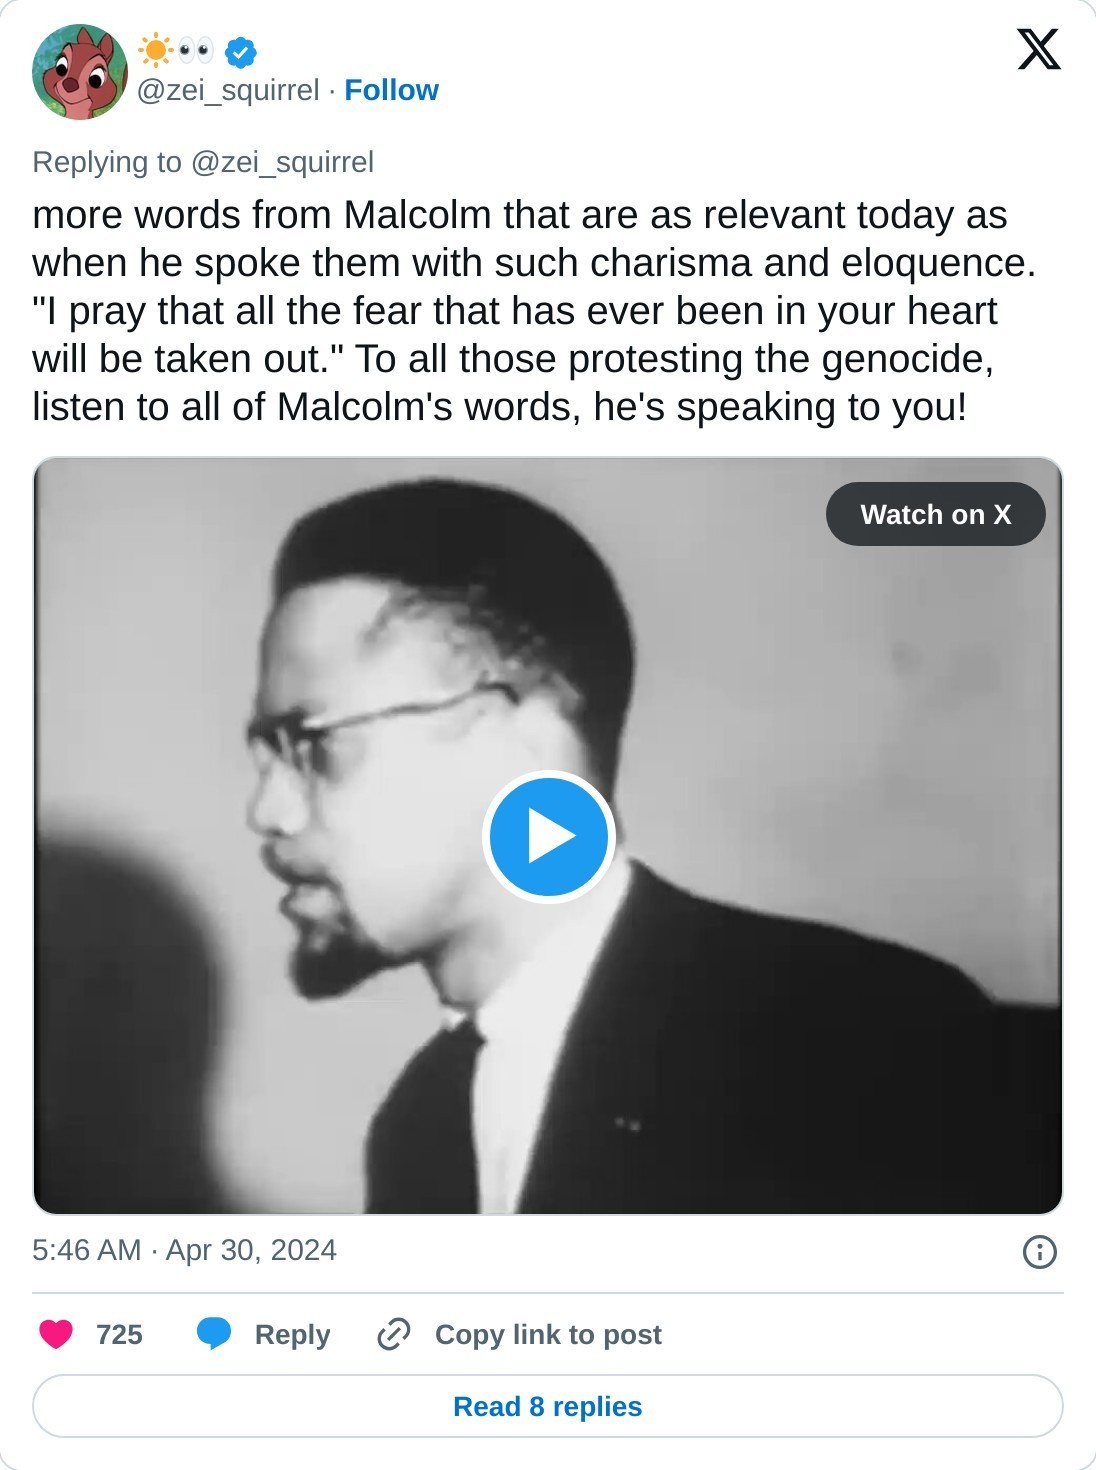 more words from Malcolm that are as relevant today as when he spoke them with such charisma and eloquence. "I pray that all the fear that has ever been in your heart will be taken out." To all those protesting the genocide, listen to all of Malcolm's words, he's speaking to you! pic.twitter.com/YPRW5OxXFL  — ☀️👀 (@zei_squirrel) April 30, 2024